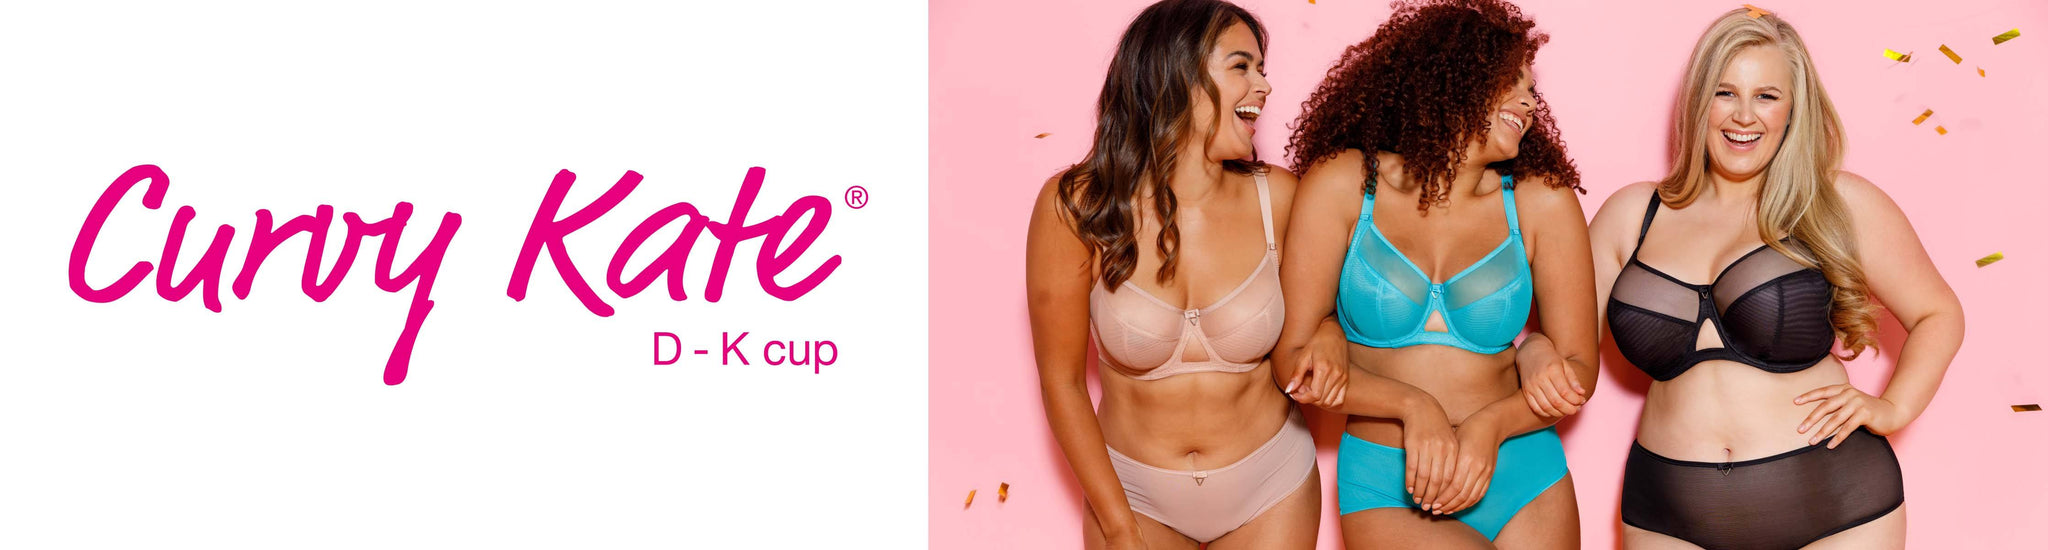 Curvy Kate Bras - Beautiful Bras Designed for Comfort & Support Page 14